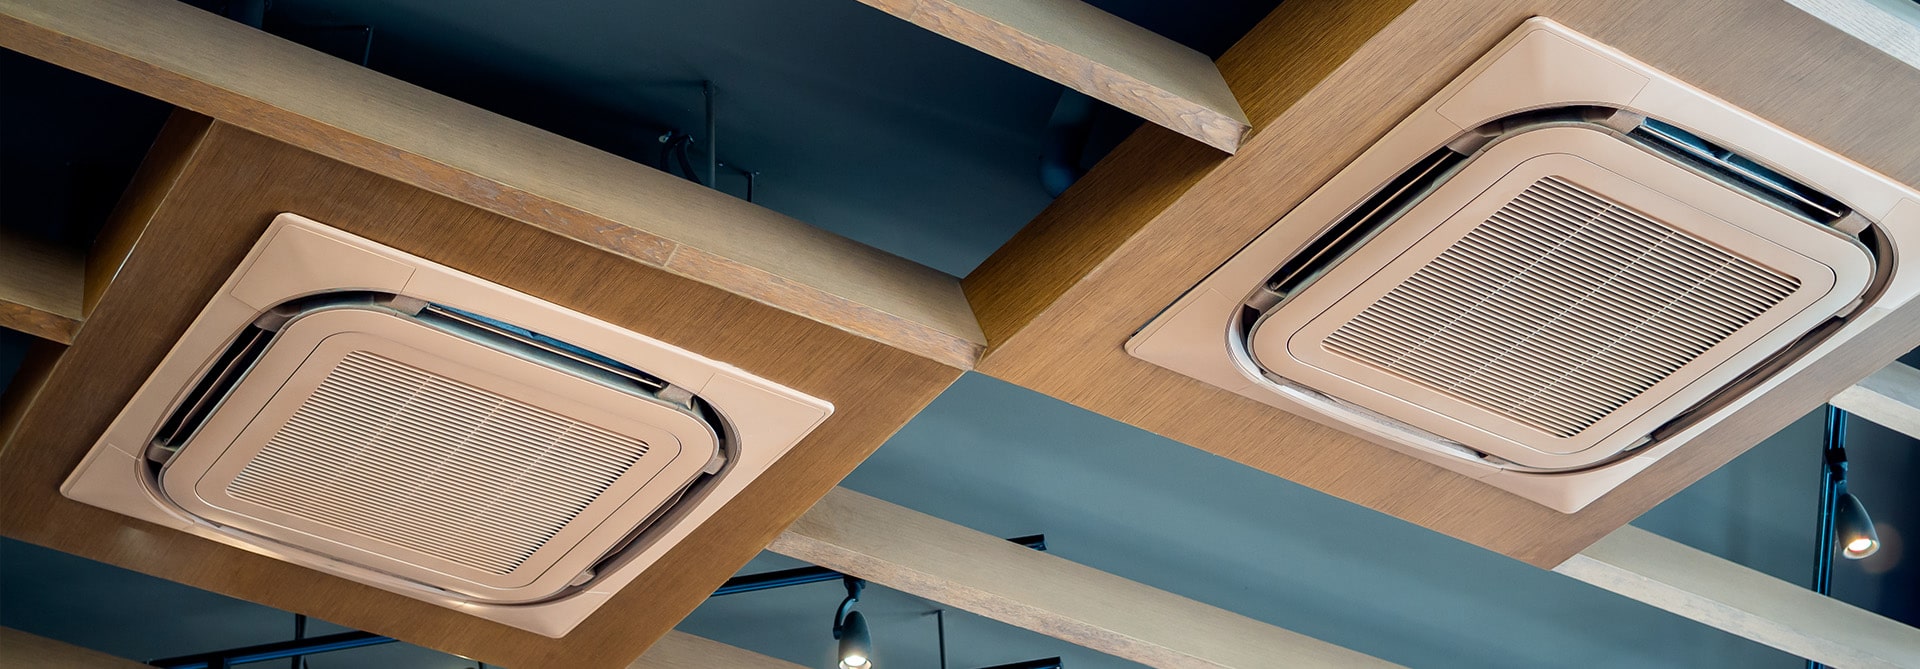 6 Reasons To Get A Ceiling Cassette Air Conditioner System